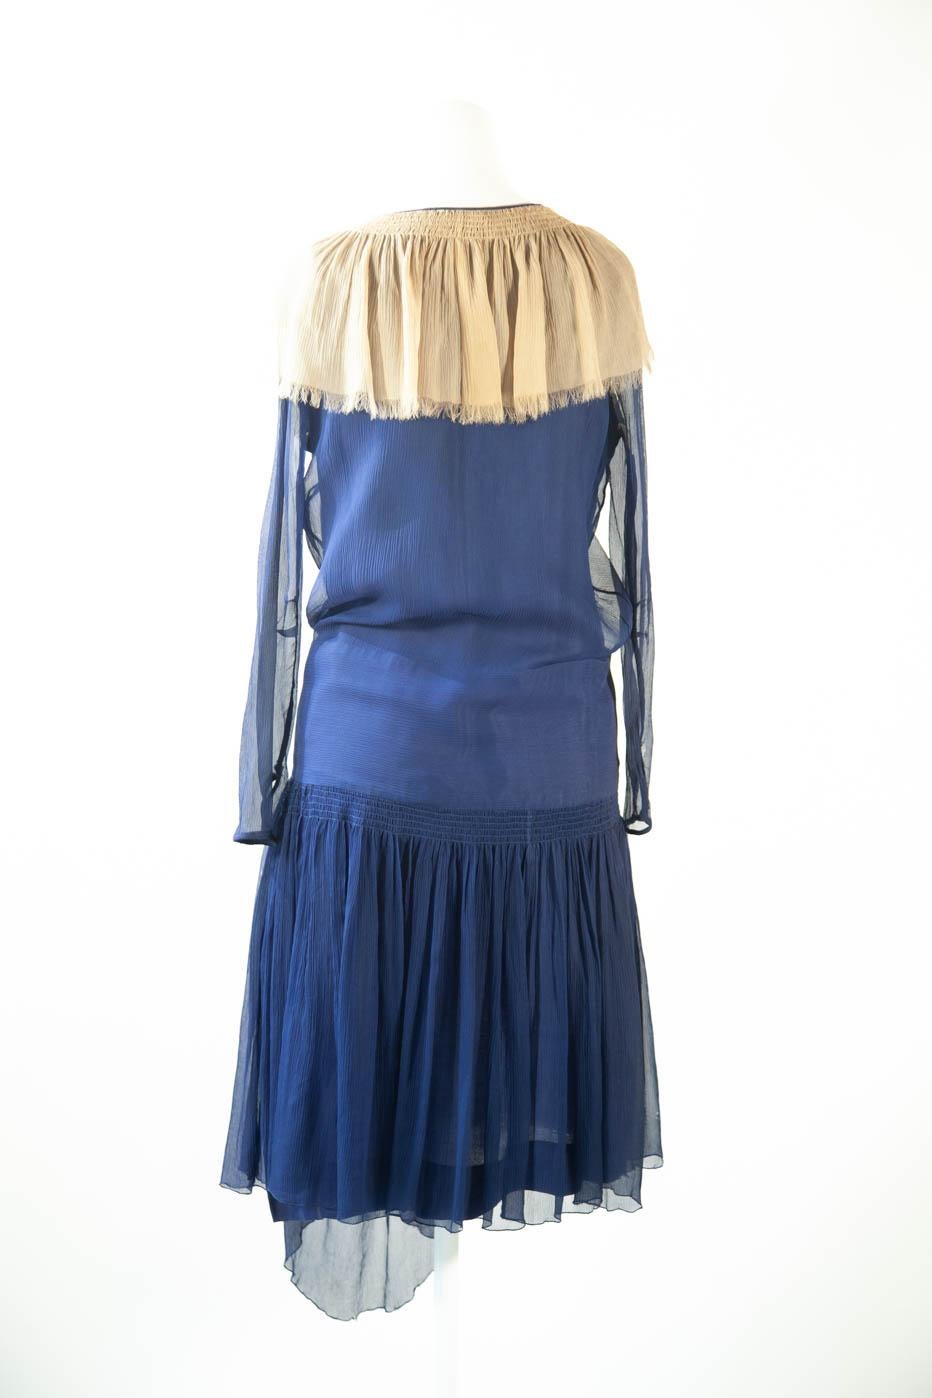 Very Vintage Original 1920s Silk Chiffon Blue Dress In Good Condition For Sale In Kingston, NY